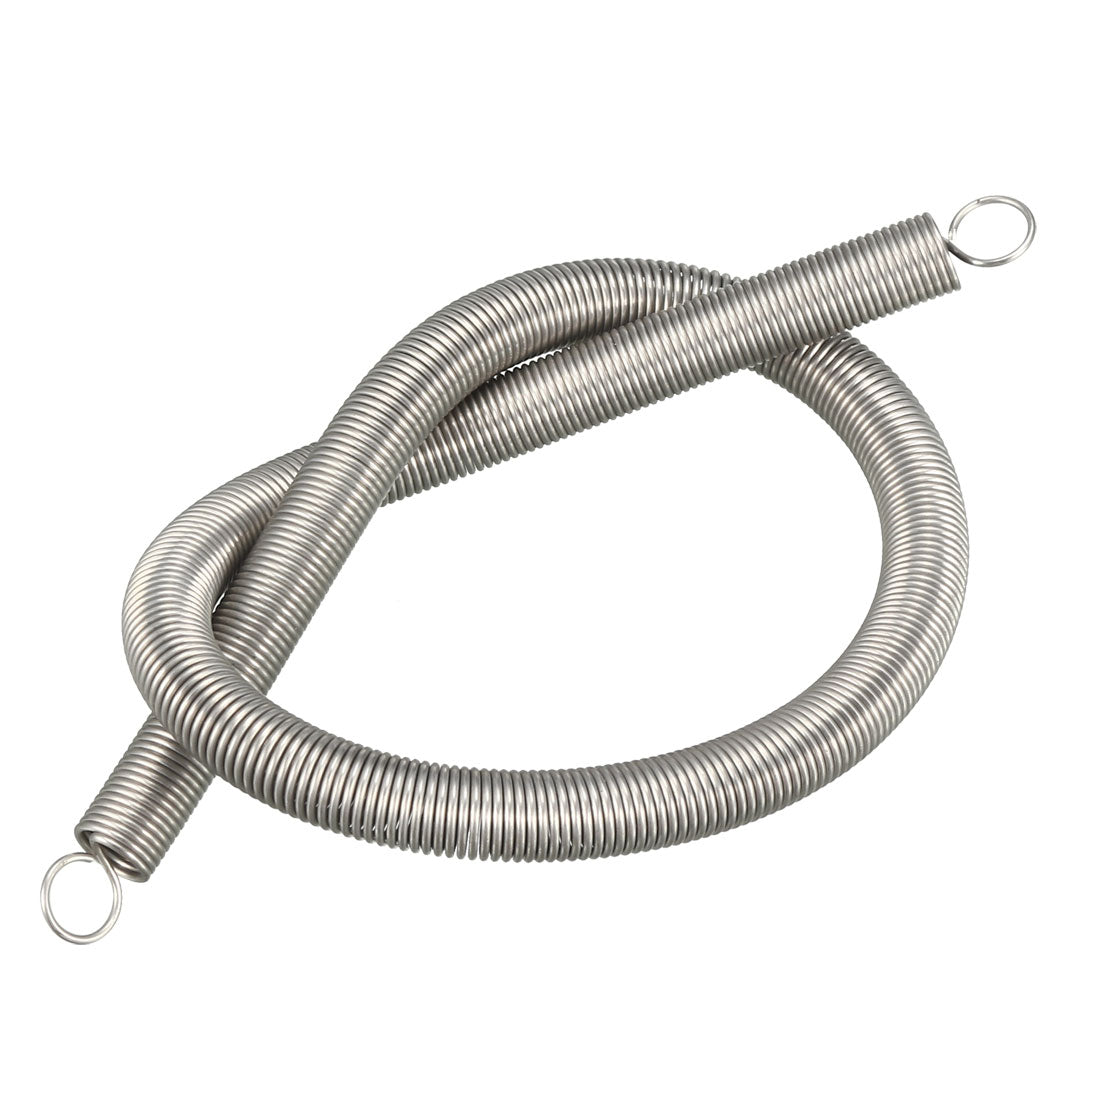 uxcell Uxcell Extended Tension Spring Wire Diameter 0.031", OD 0.31", Free Length 11.81"